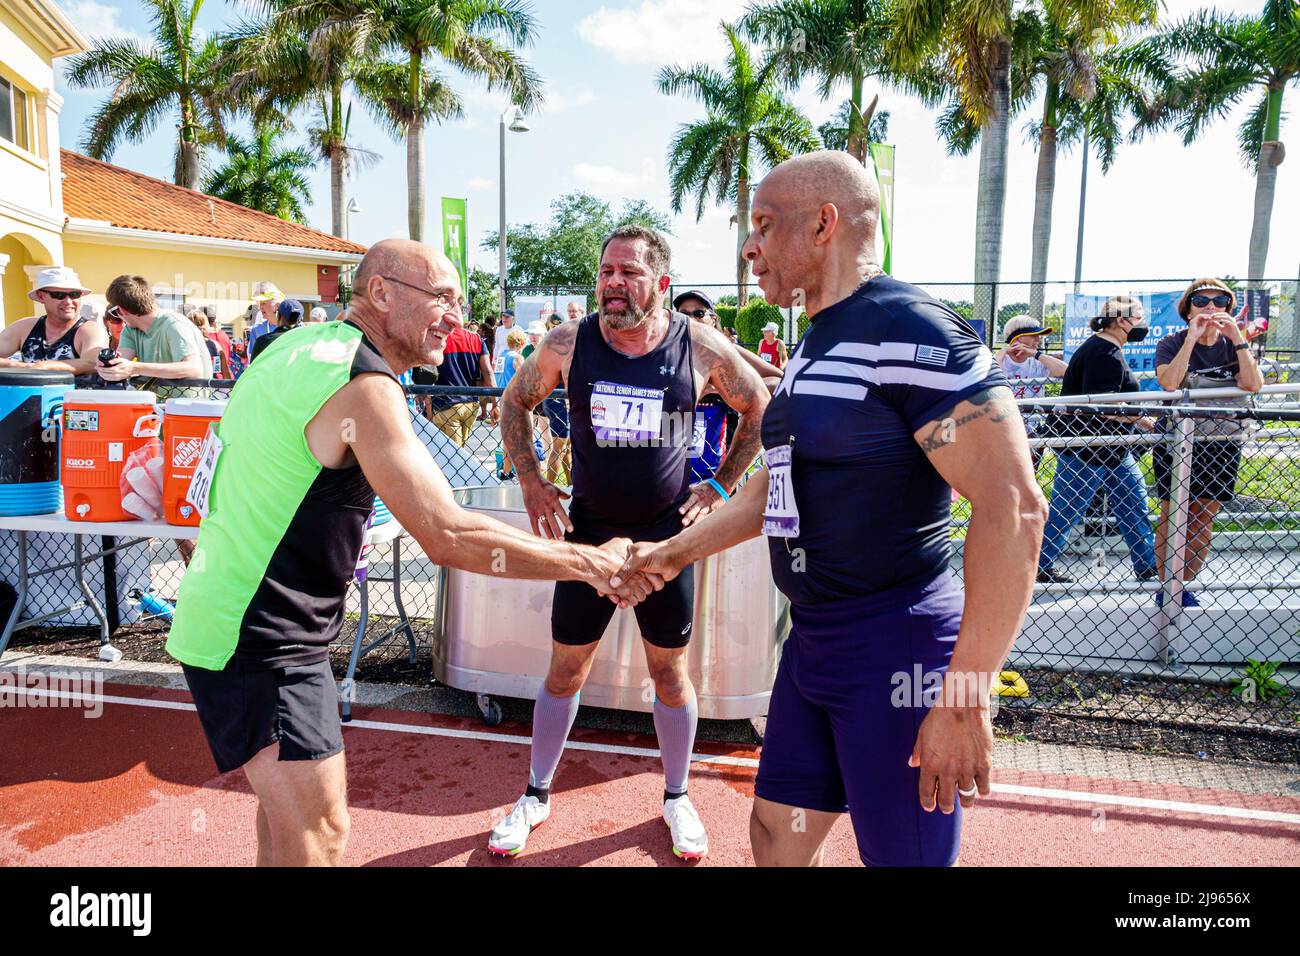 Fort Ft. Lauderdale Florida,Ansin Sports Complex Track & Field National Senior Games,men competitors runners Stock Photo